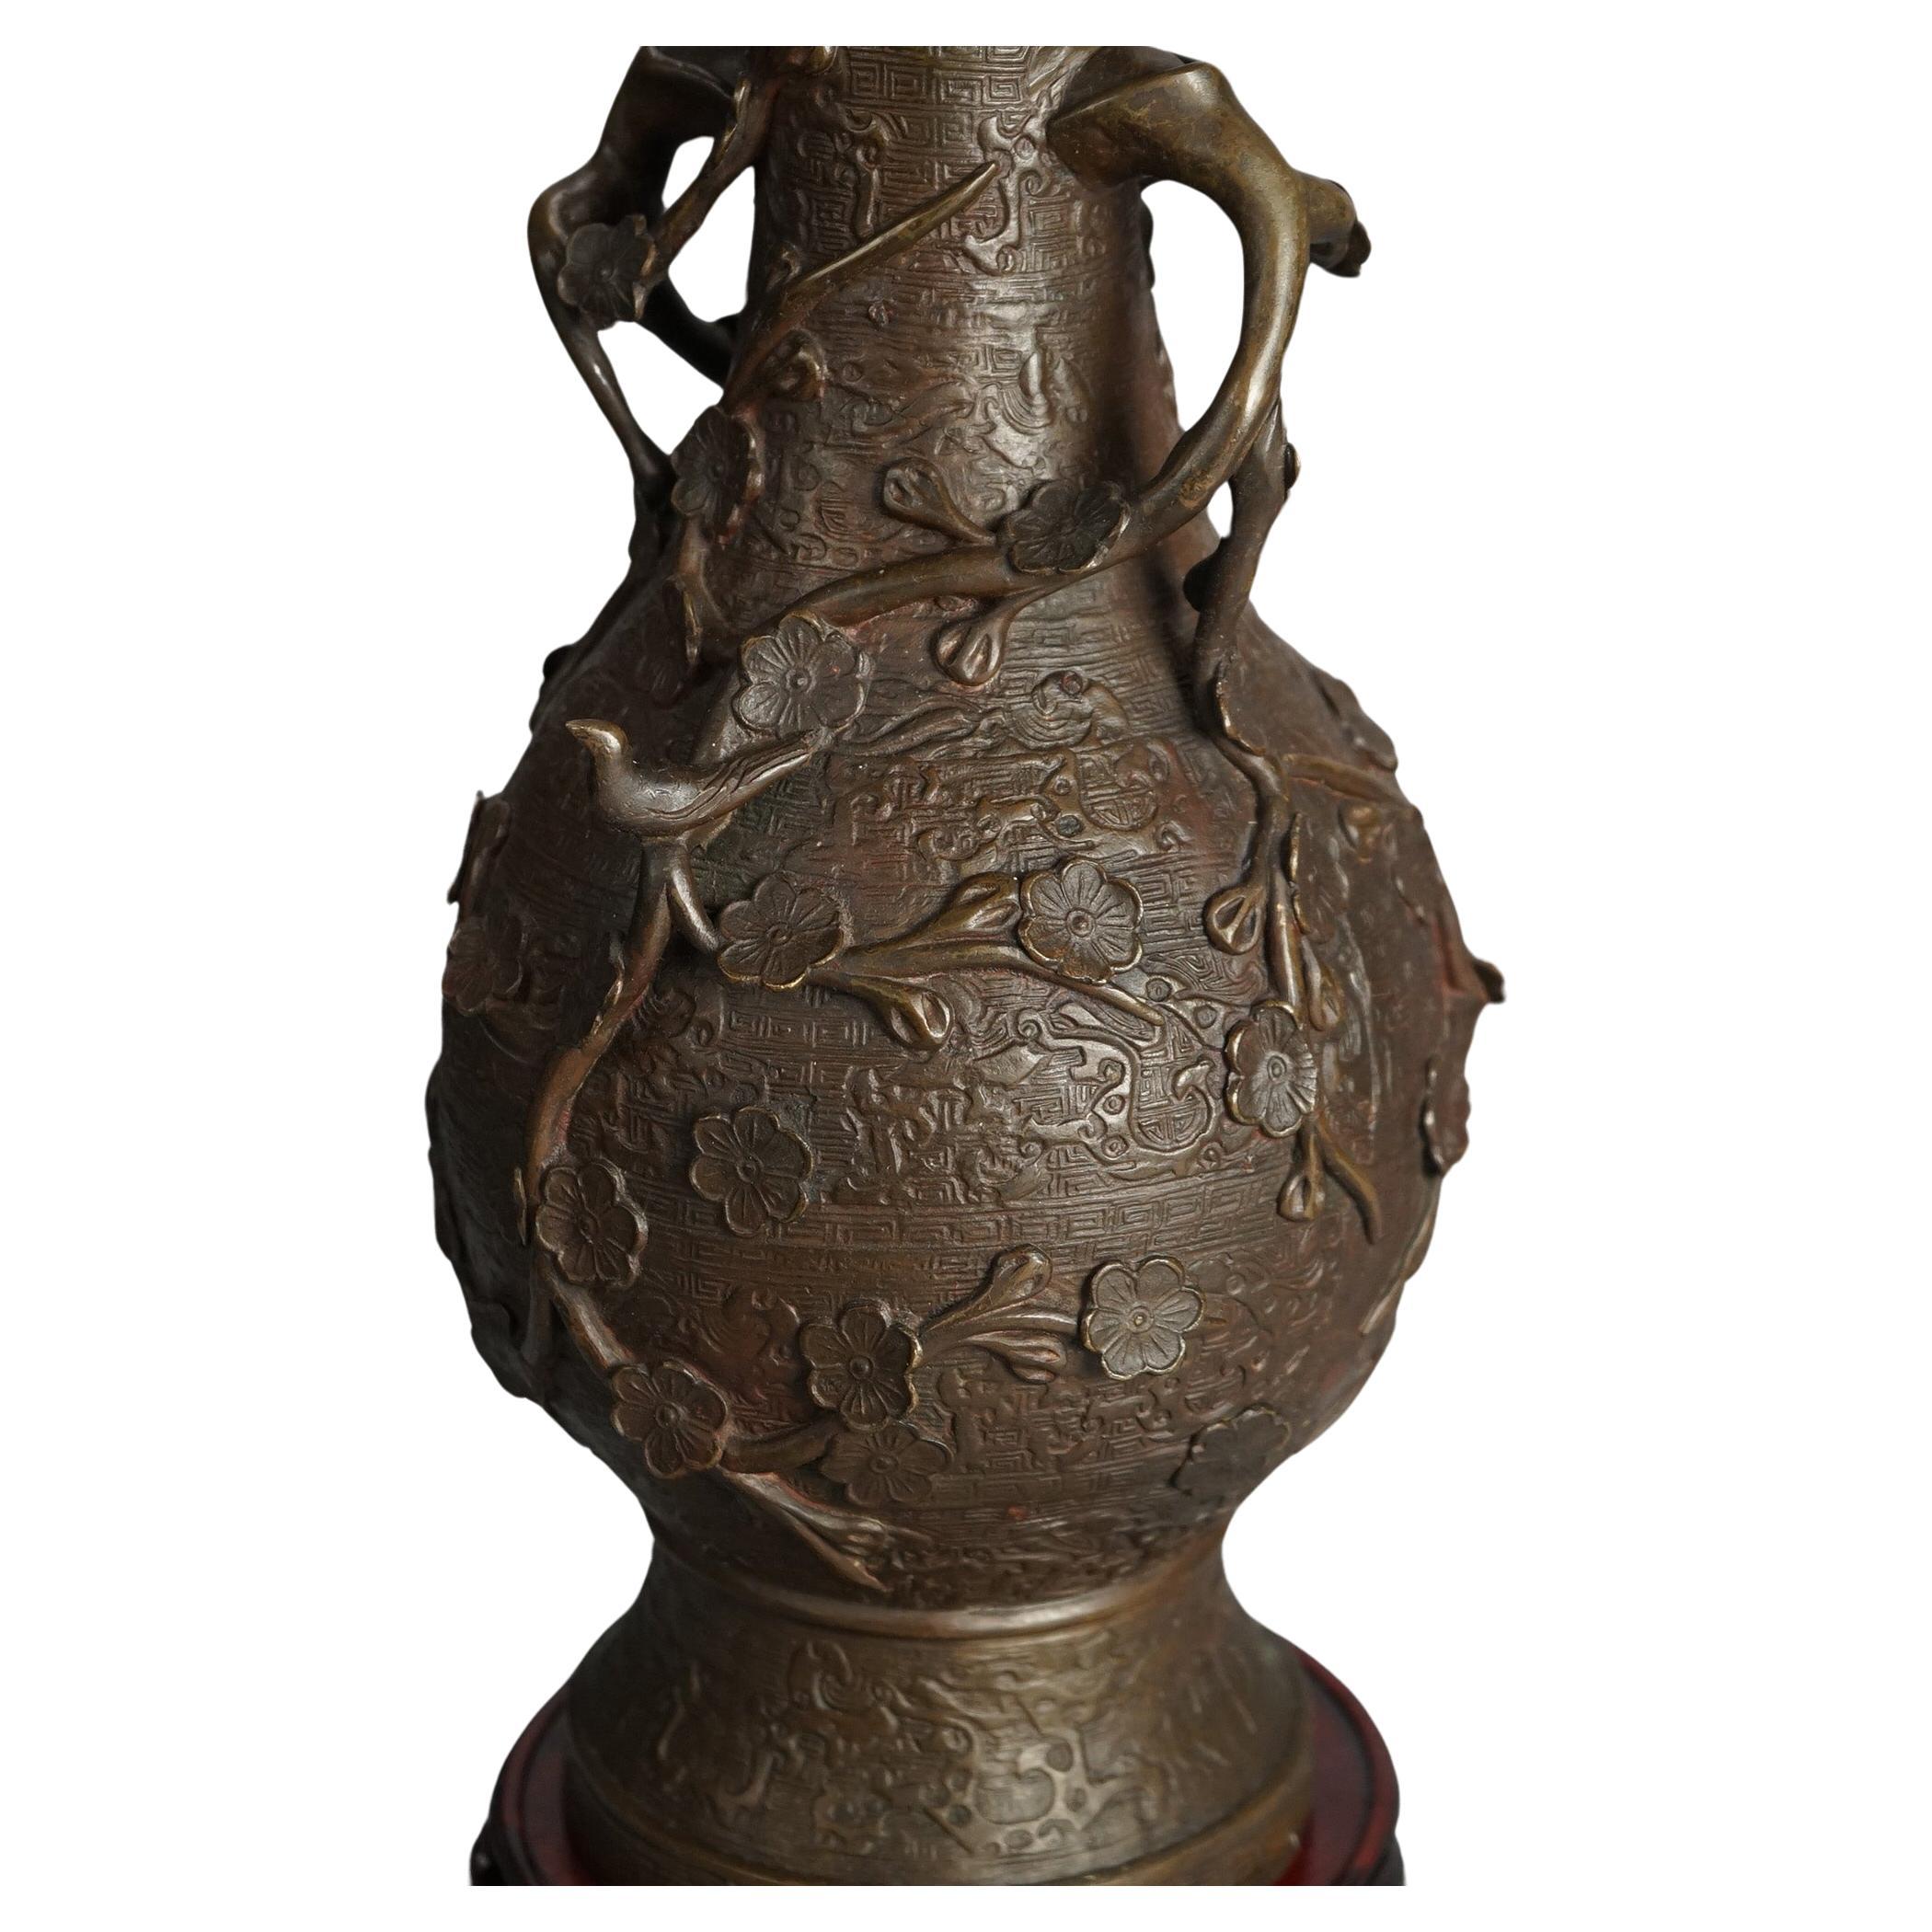 Antique Chinese Bronze Vase with Floral Elements & Branch Form Handles on Wooden Stand C1890

Measures- 18''H x 6.75''W x 6.75''D